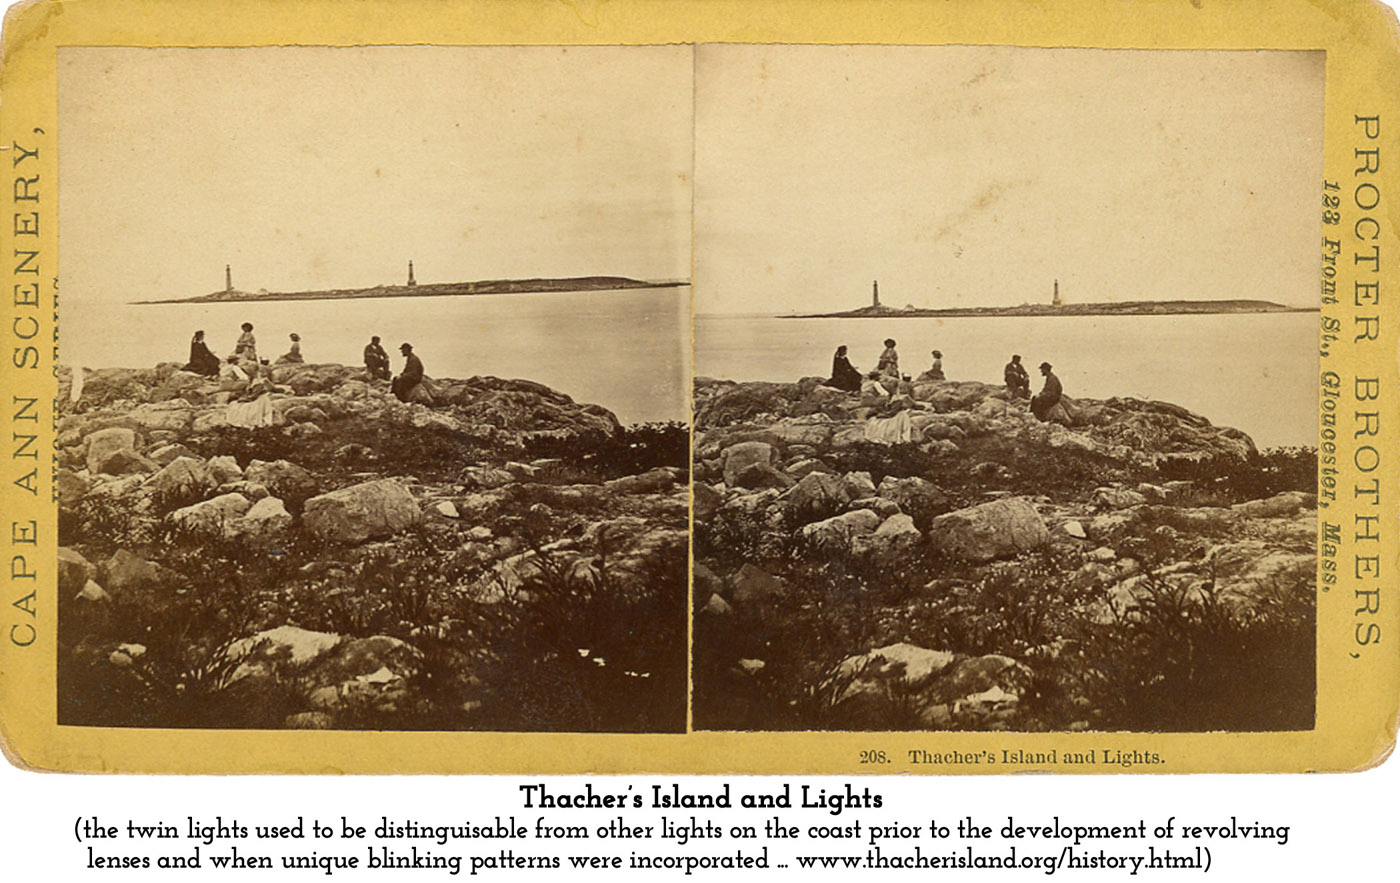 view of the twin lights on Thacher's Island